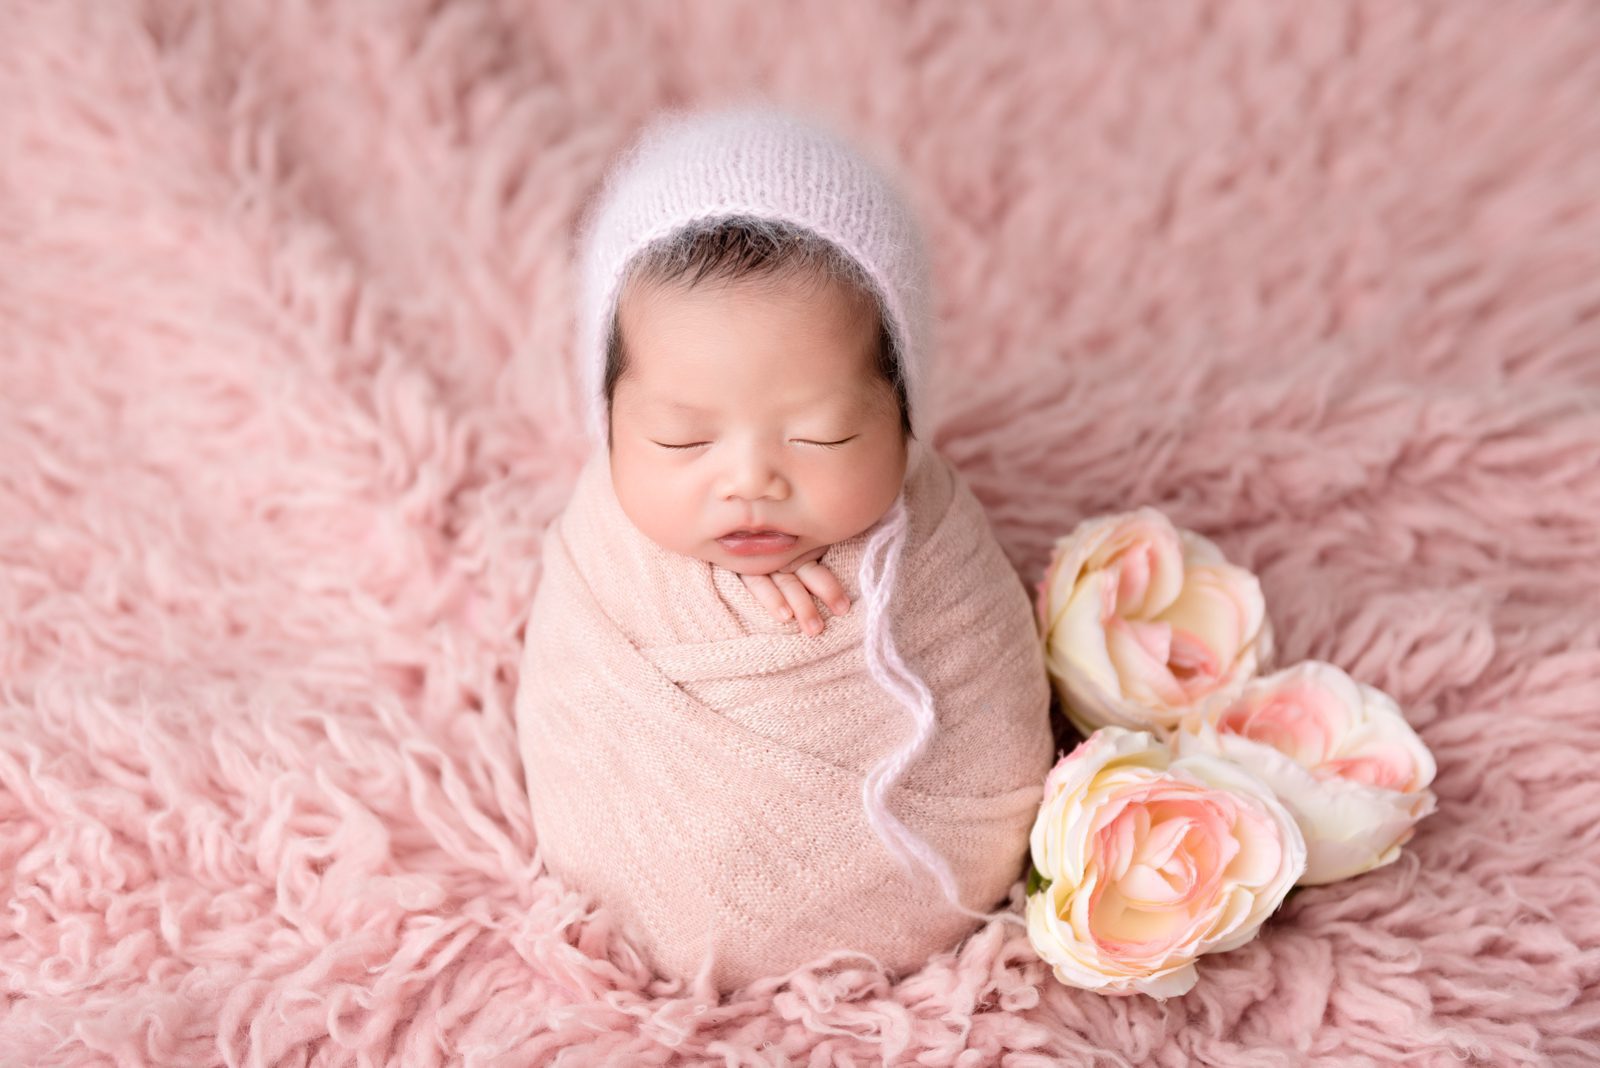 newborn photography - baby girl wrapped in pink - potato sack pose